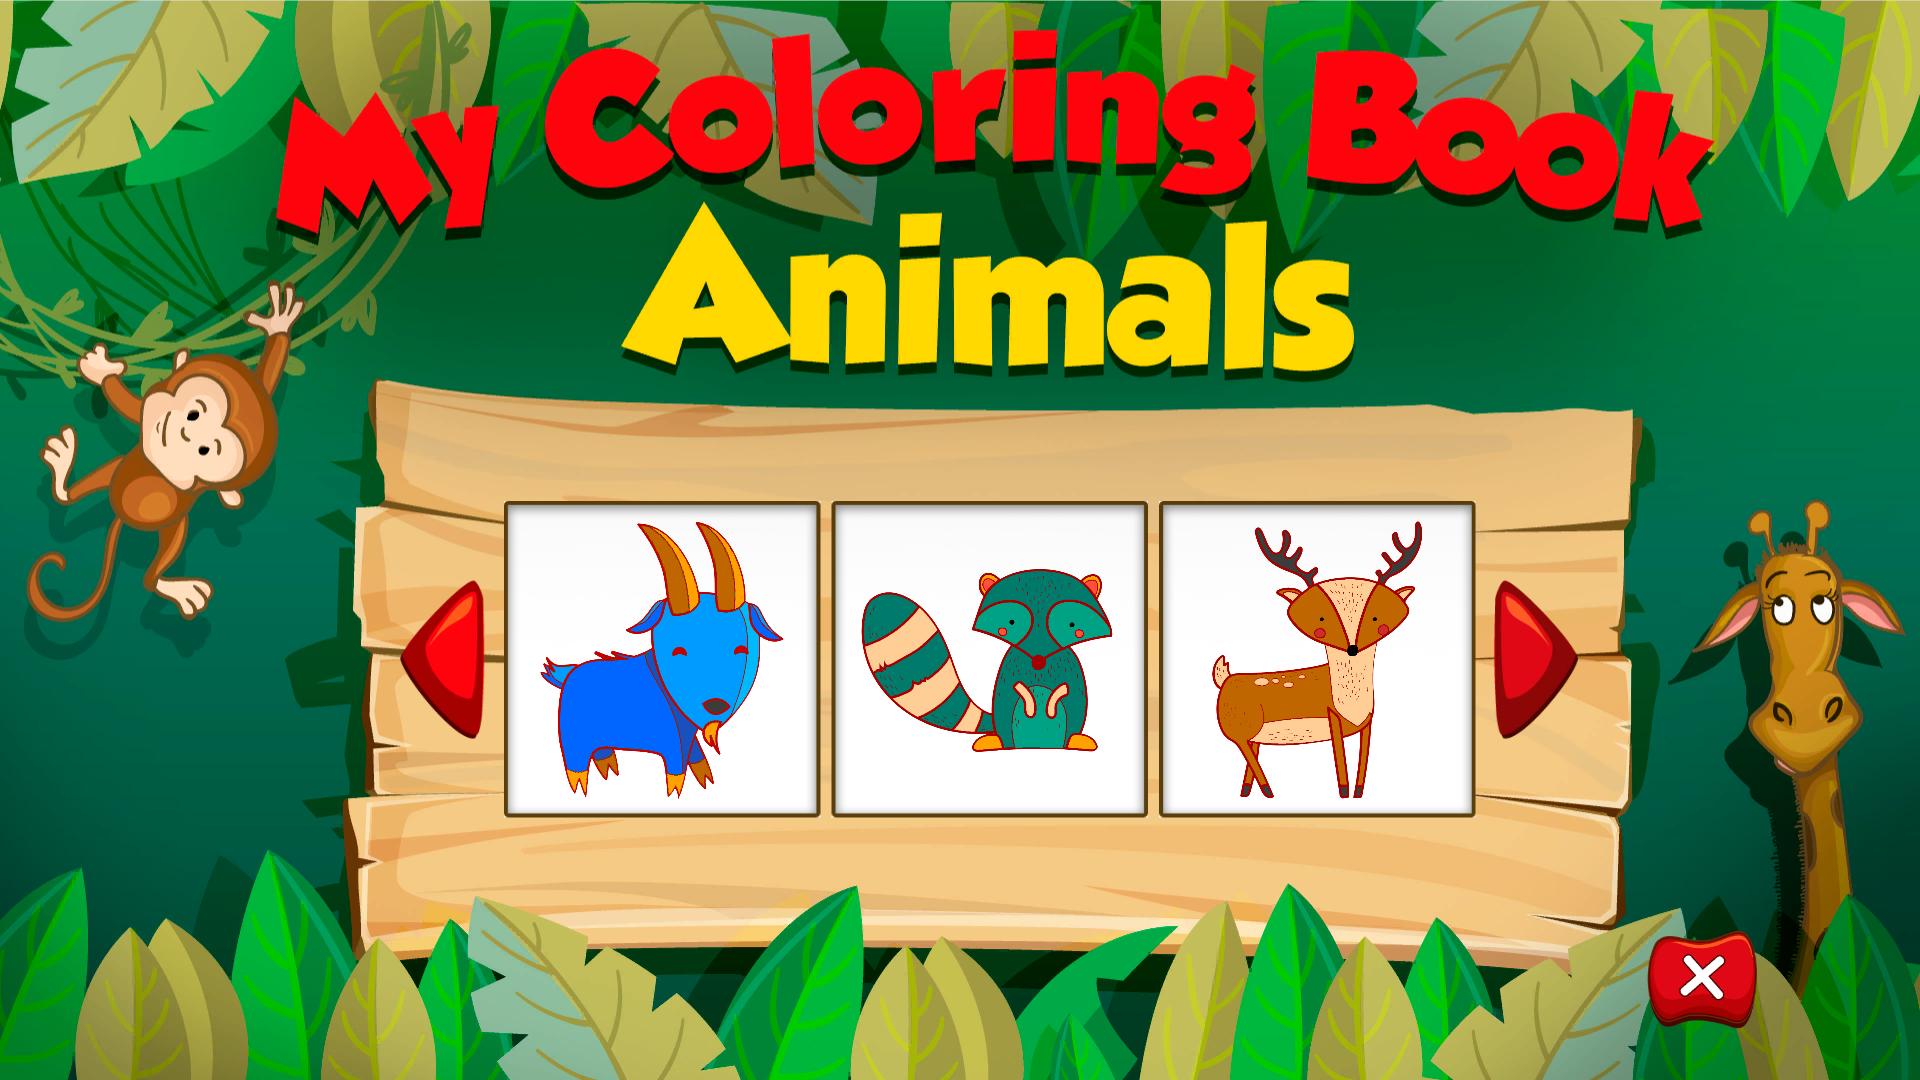 Download My Coloring Book Animals On Steam